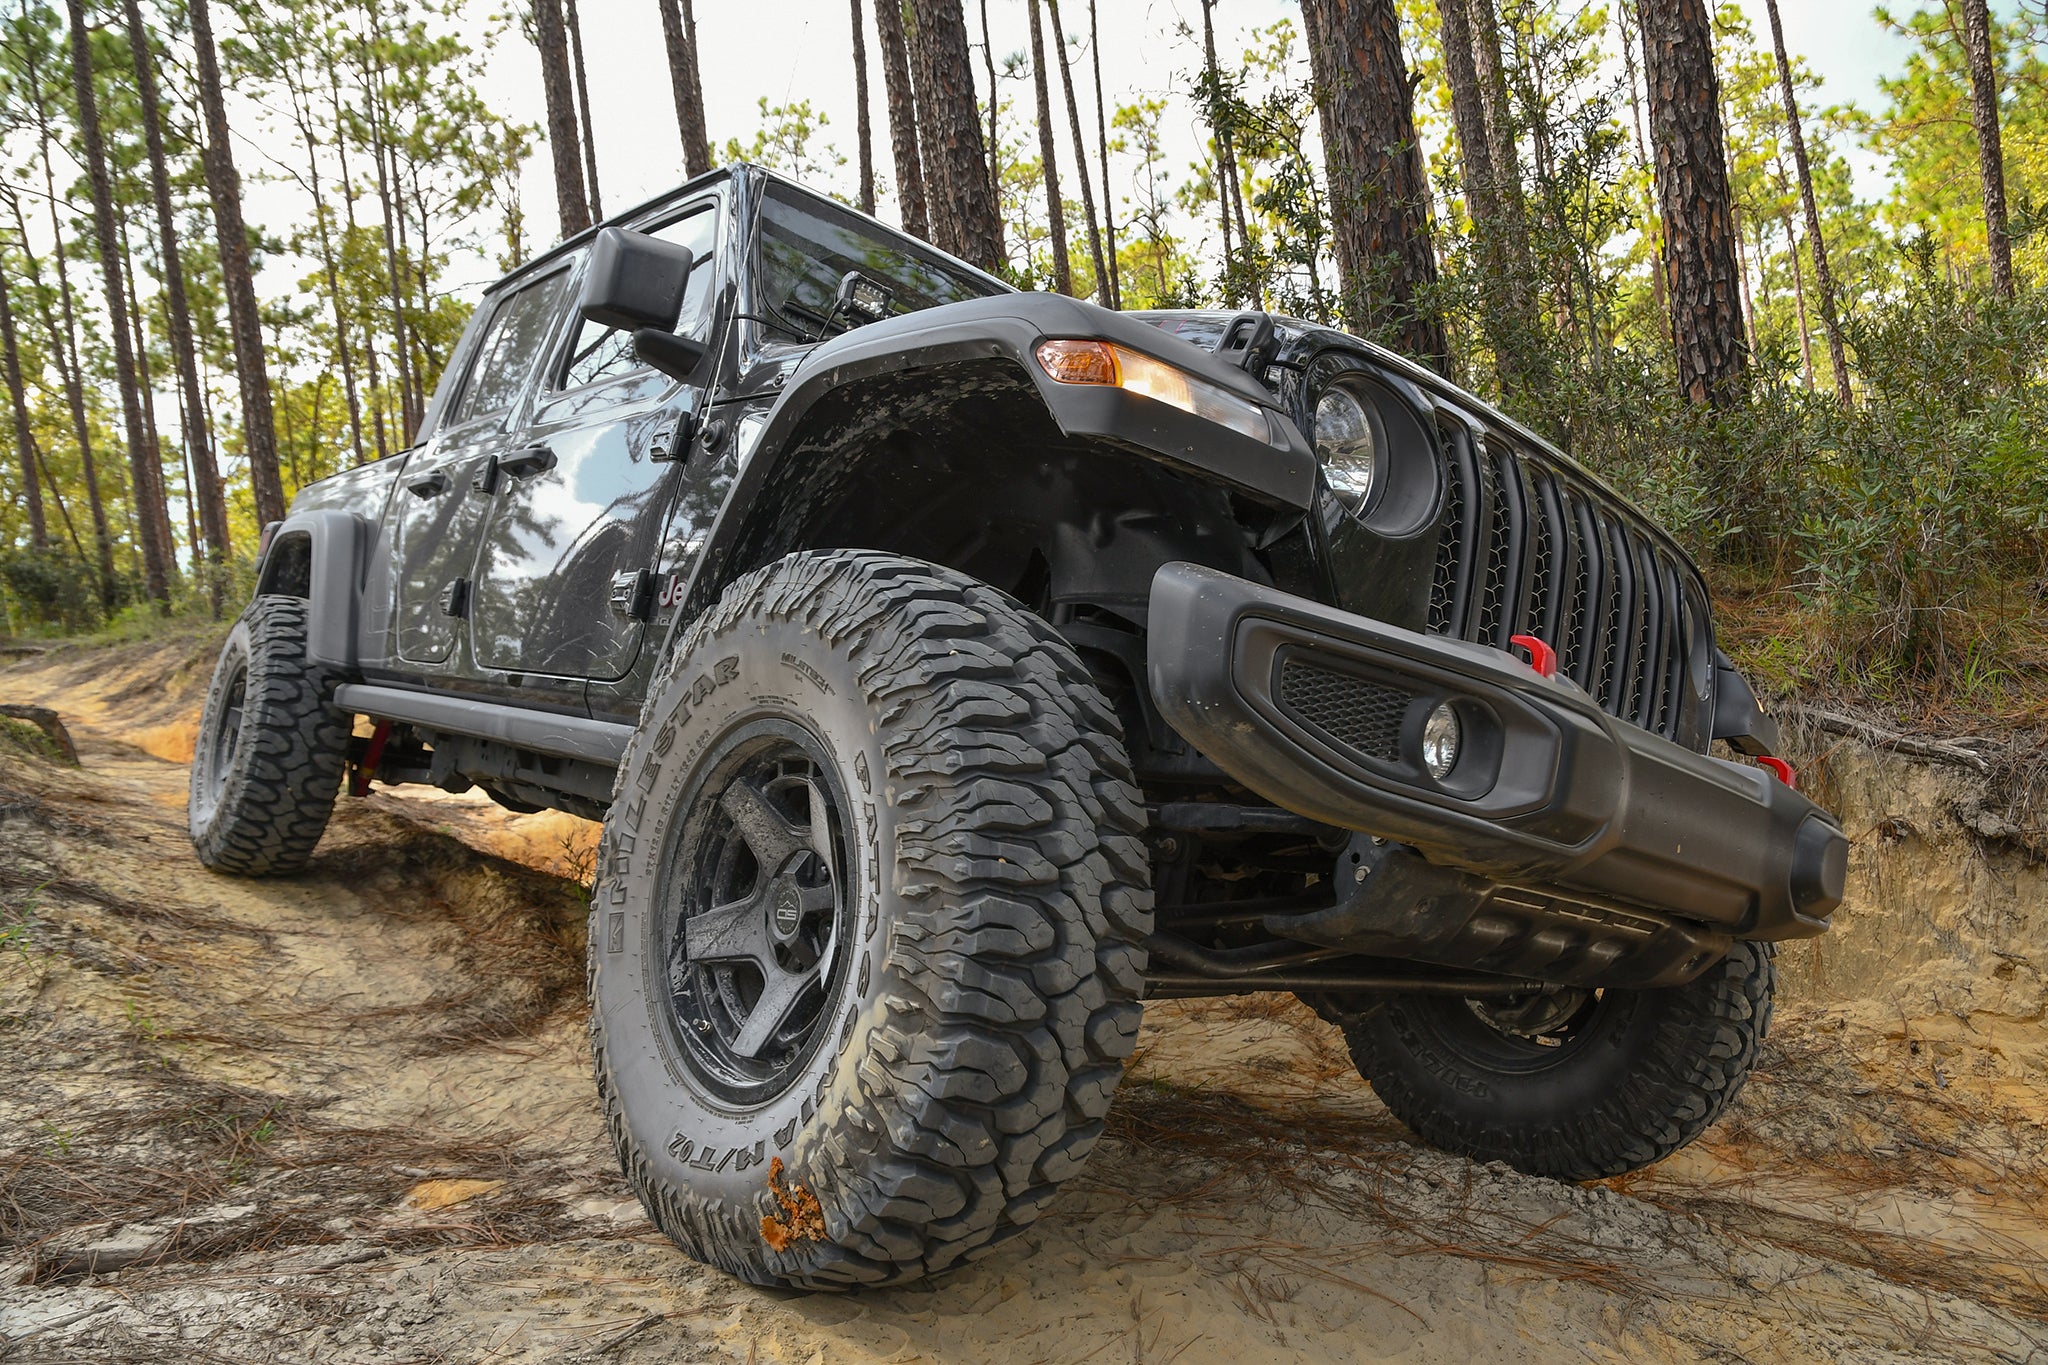 overland sector wheels jeep gladiator rubicon on 17x9 satin black atlas wheels on dirt trail in woods